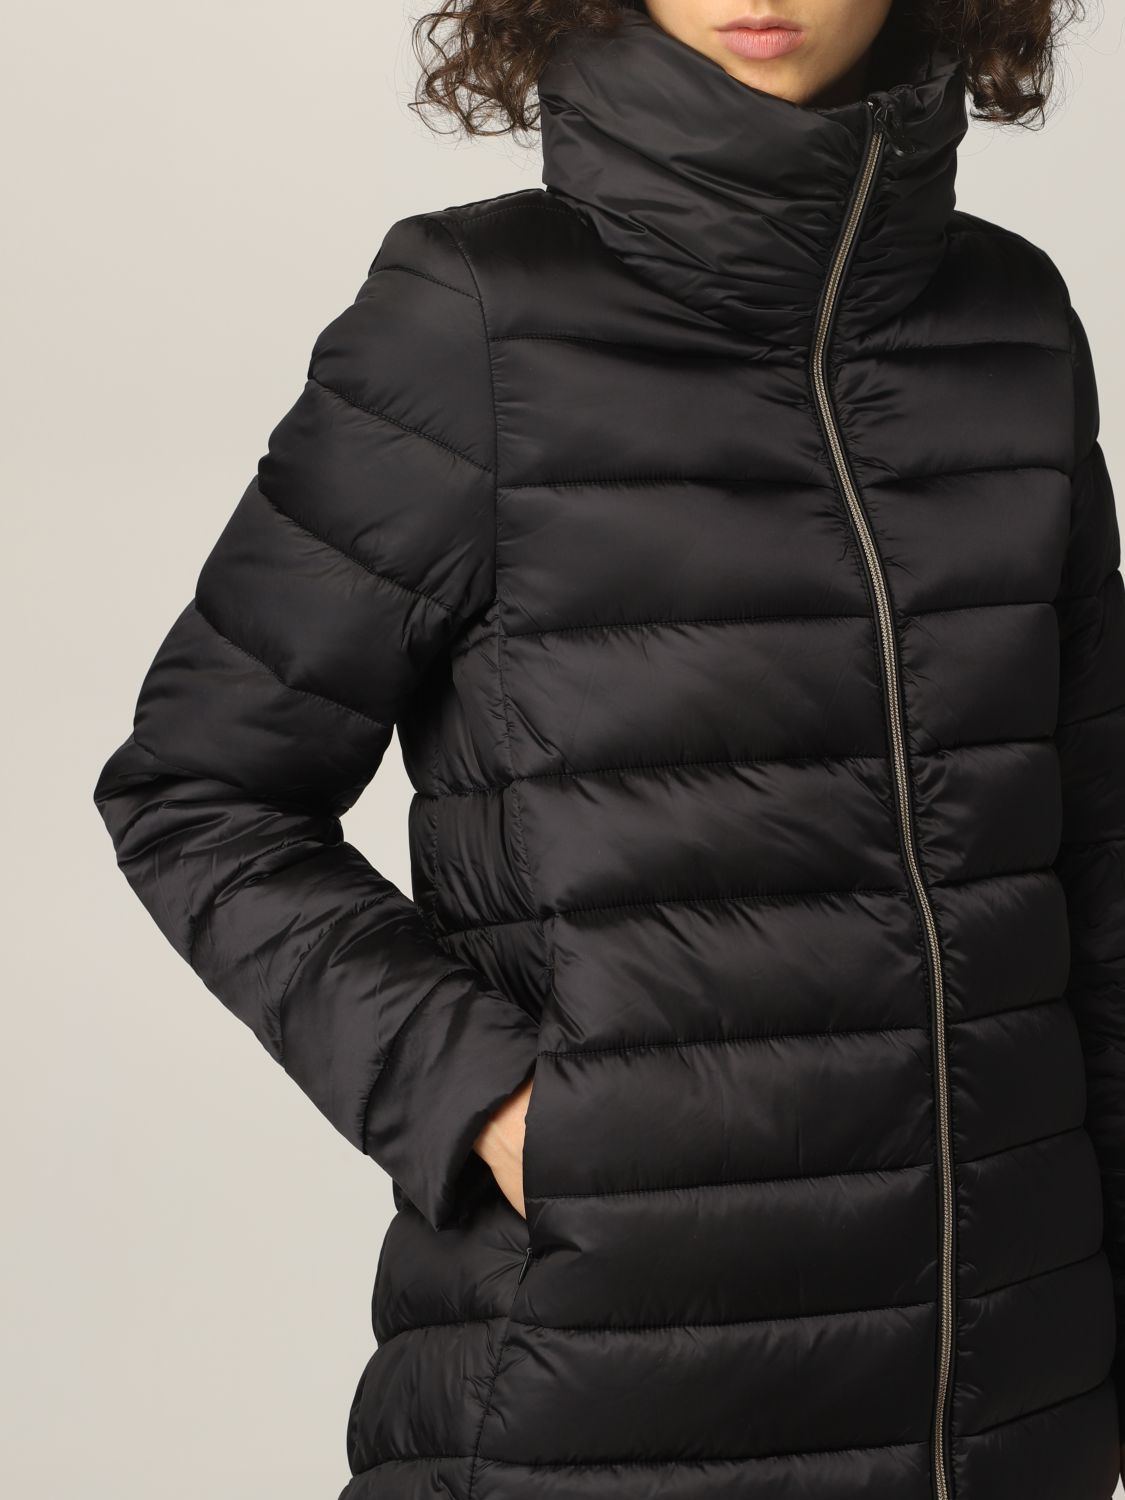 Jacket Save The Duck: Jacket women Save The Duck black 4